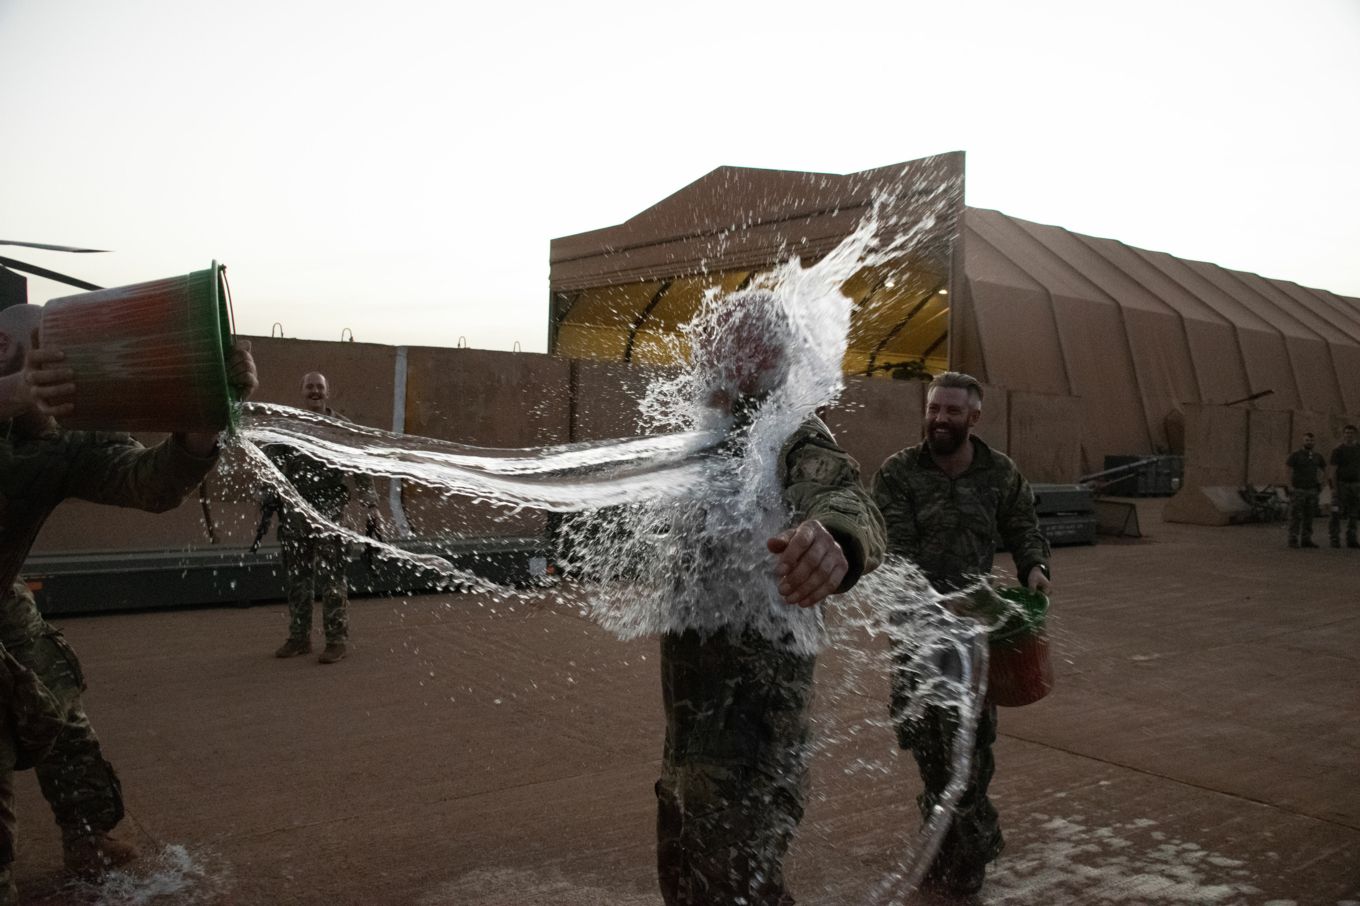 Master Aircrew Ruffles having a bucket of water thrown over him